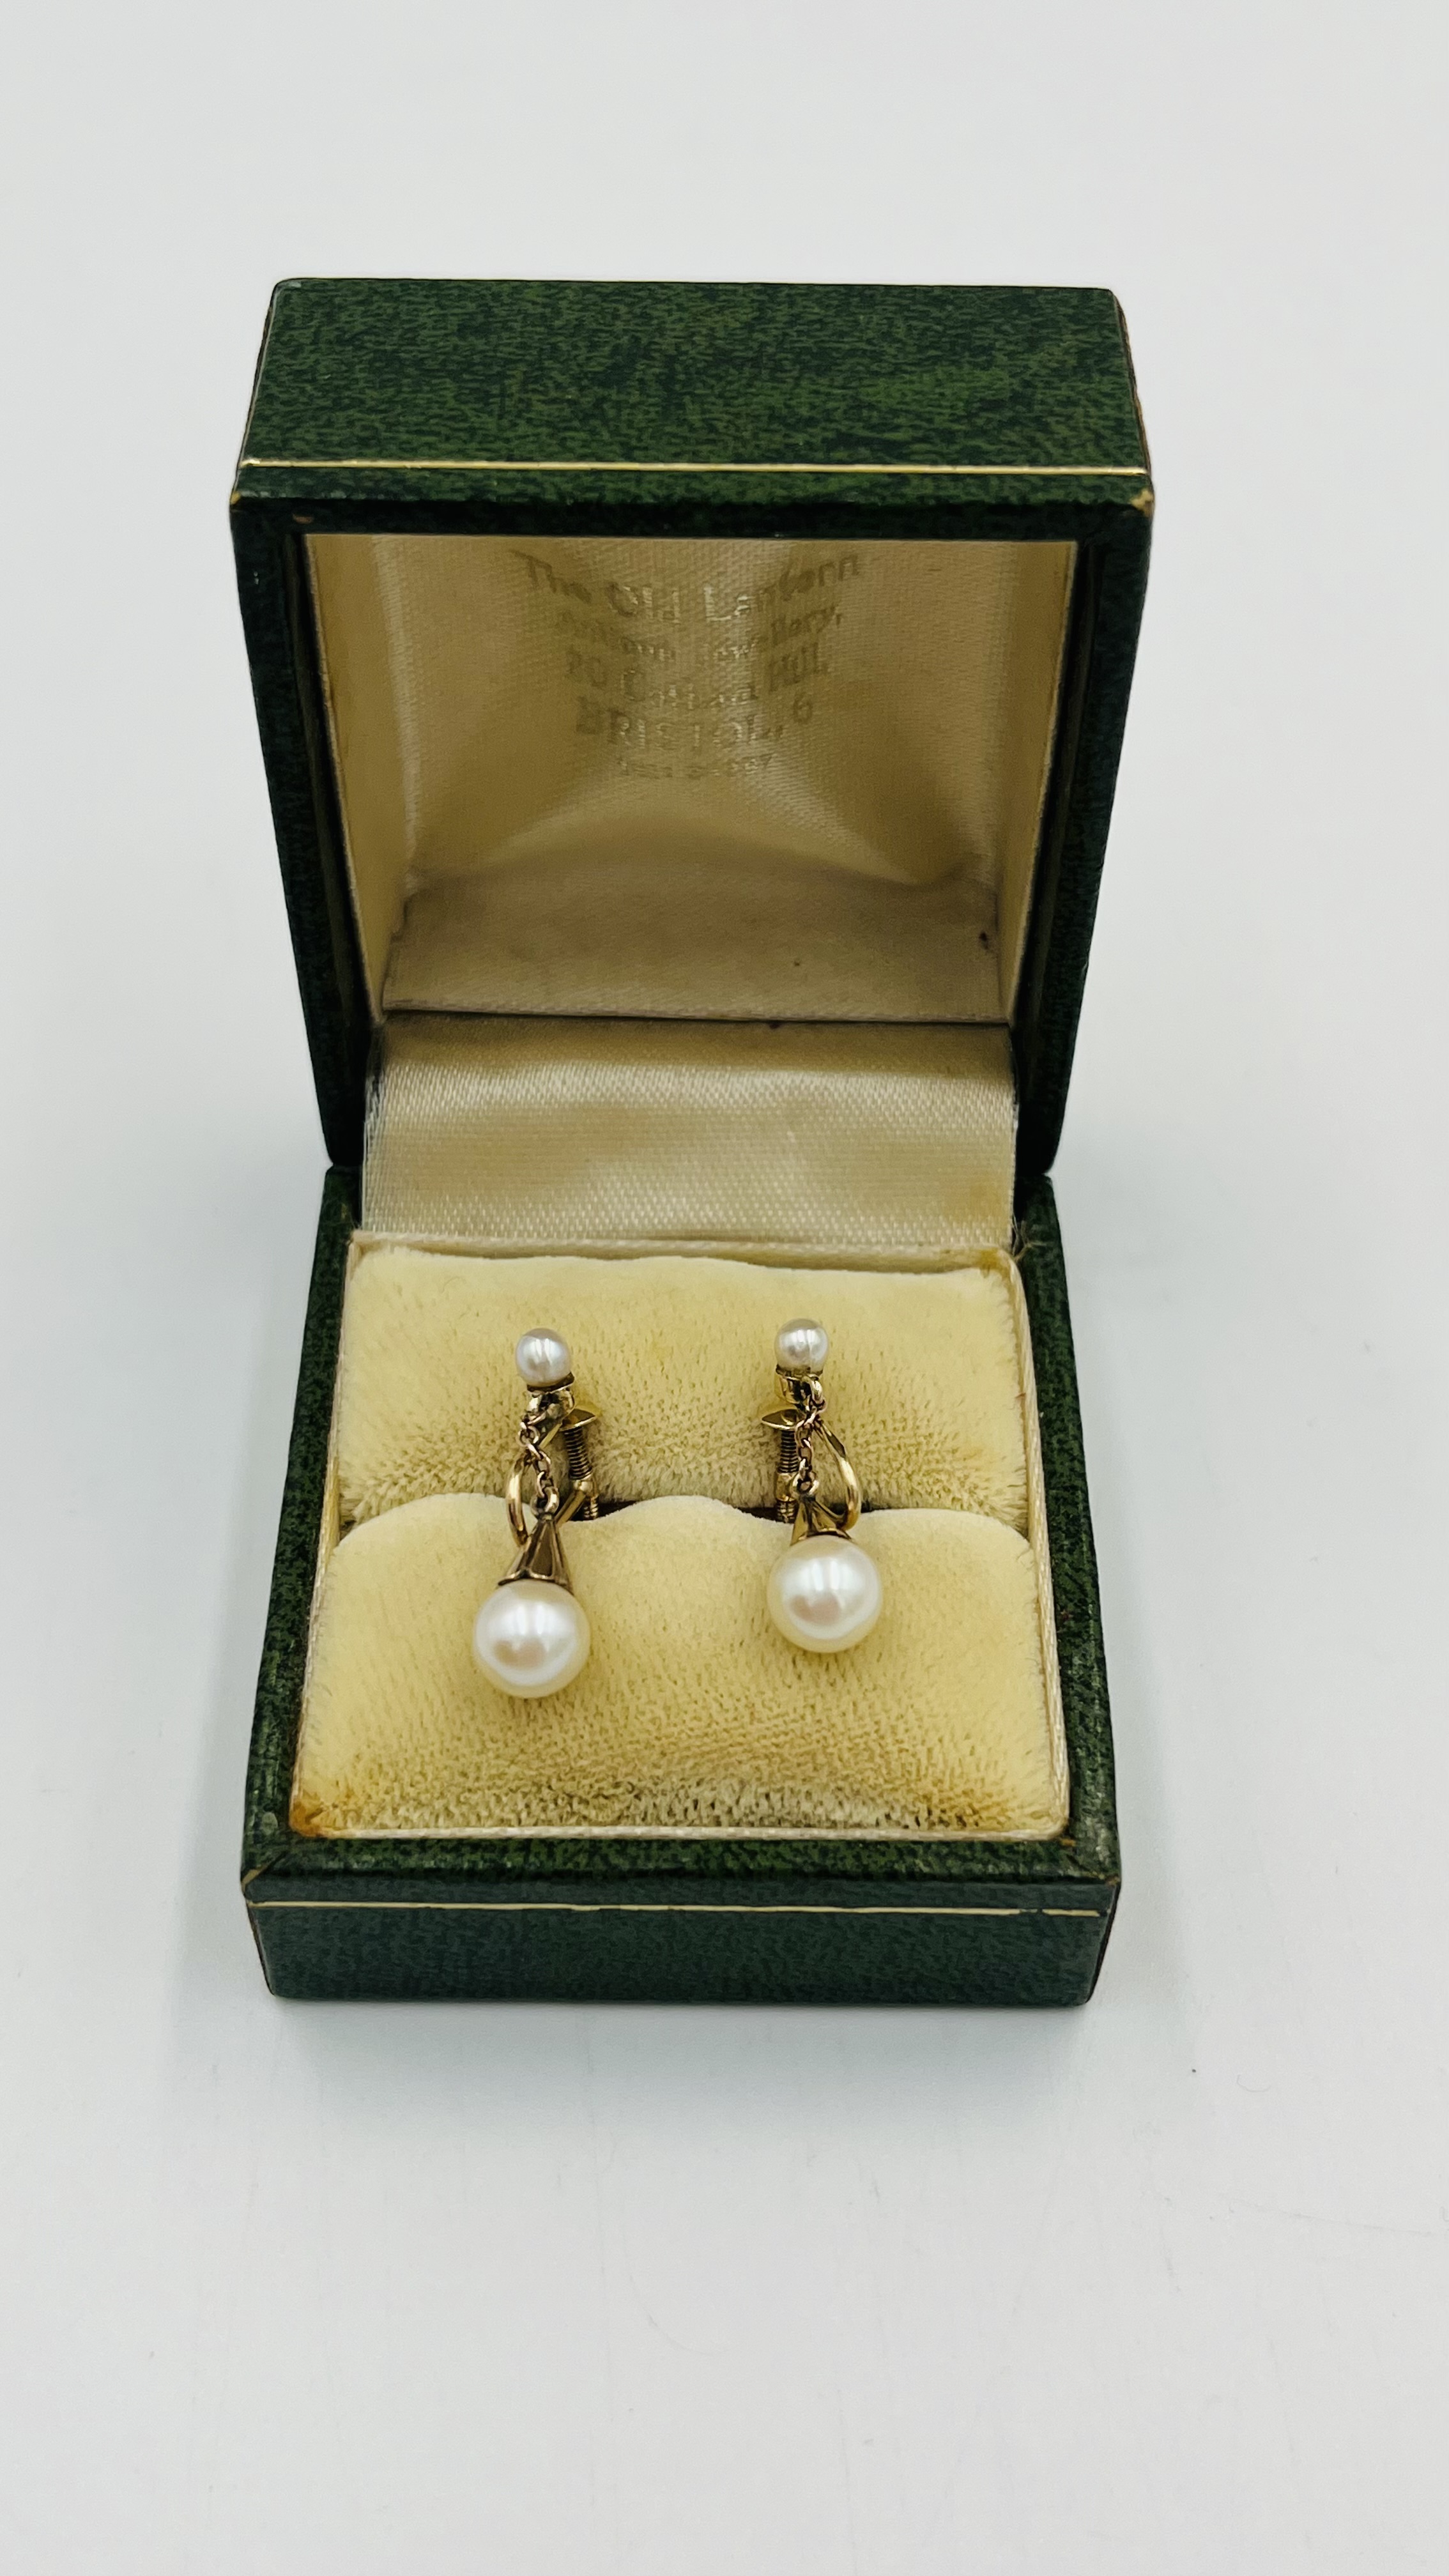 Pair of 9ct gold earrings with pearl drops